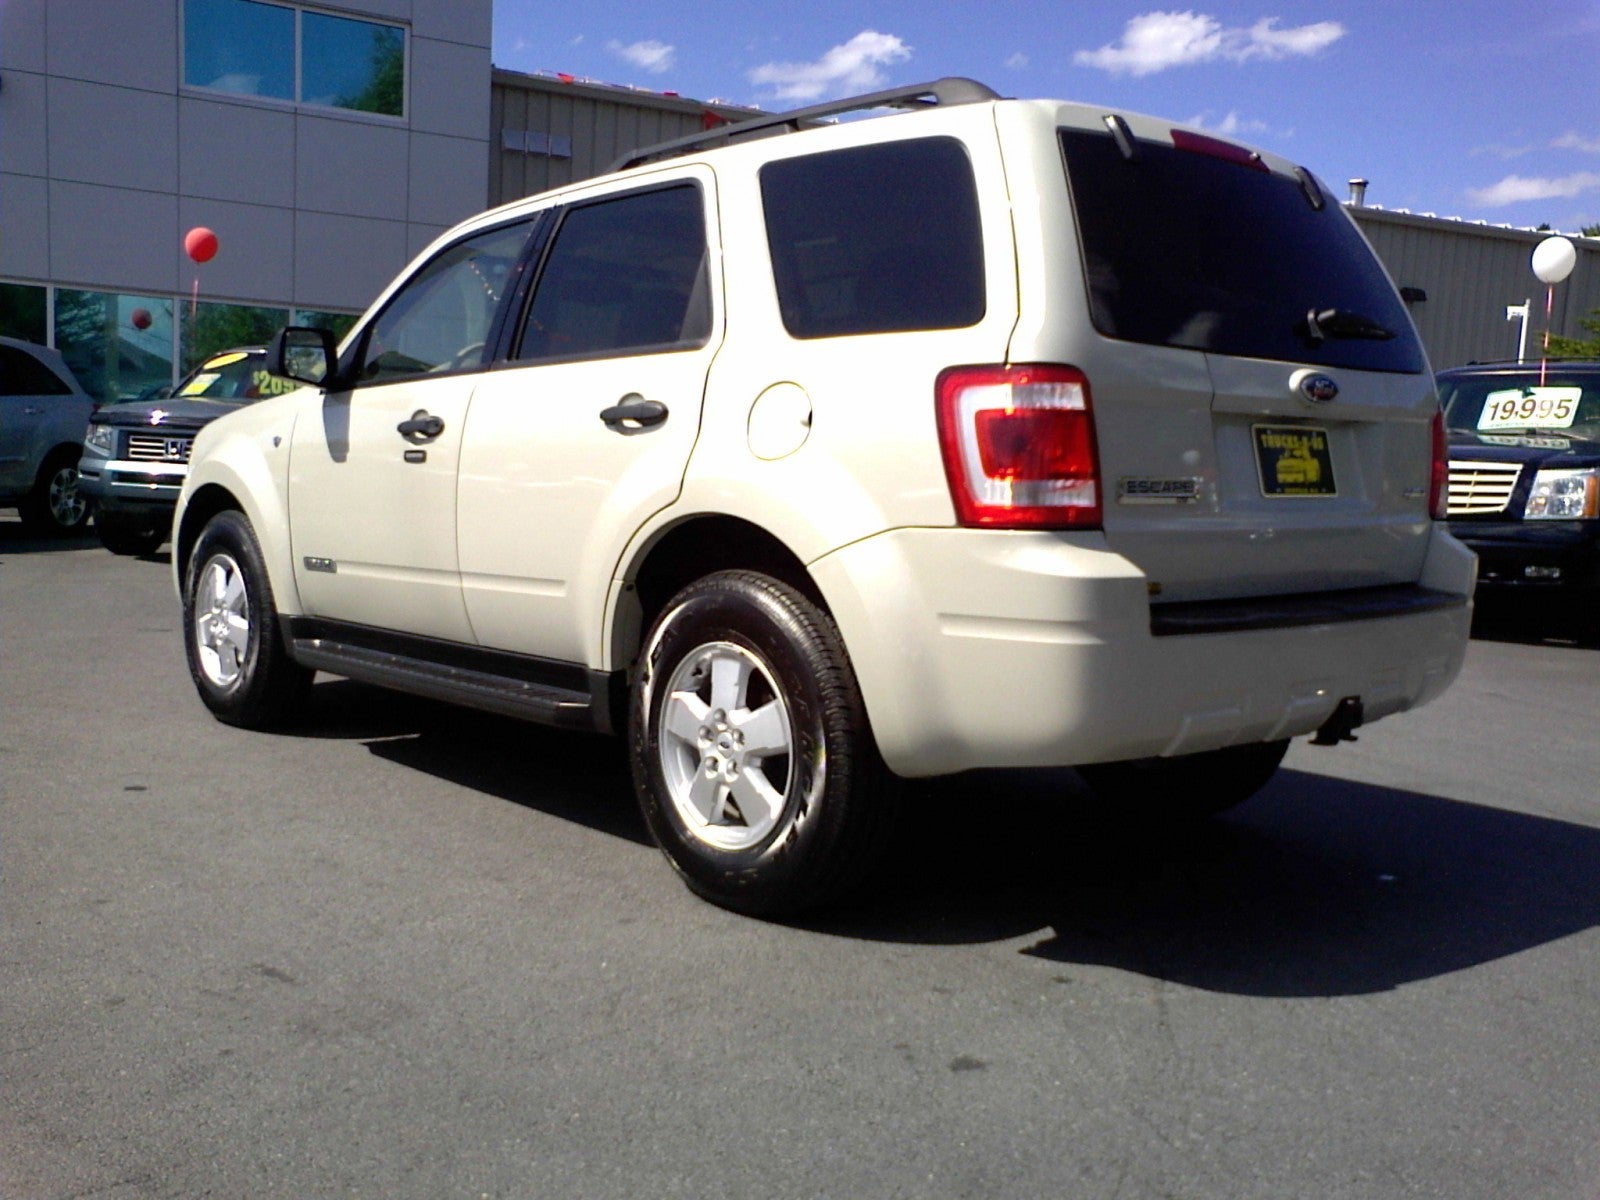 2008 Ford Escape Xlt V6 - www.proteckmachinery.com 2008 Ford Escape Xlt 4wd V6 Towing Capacity